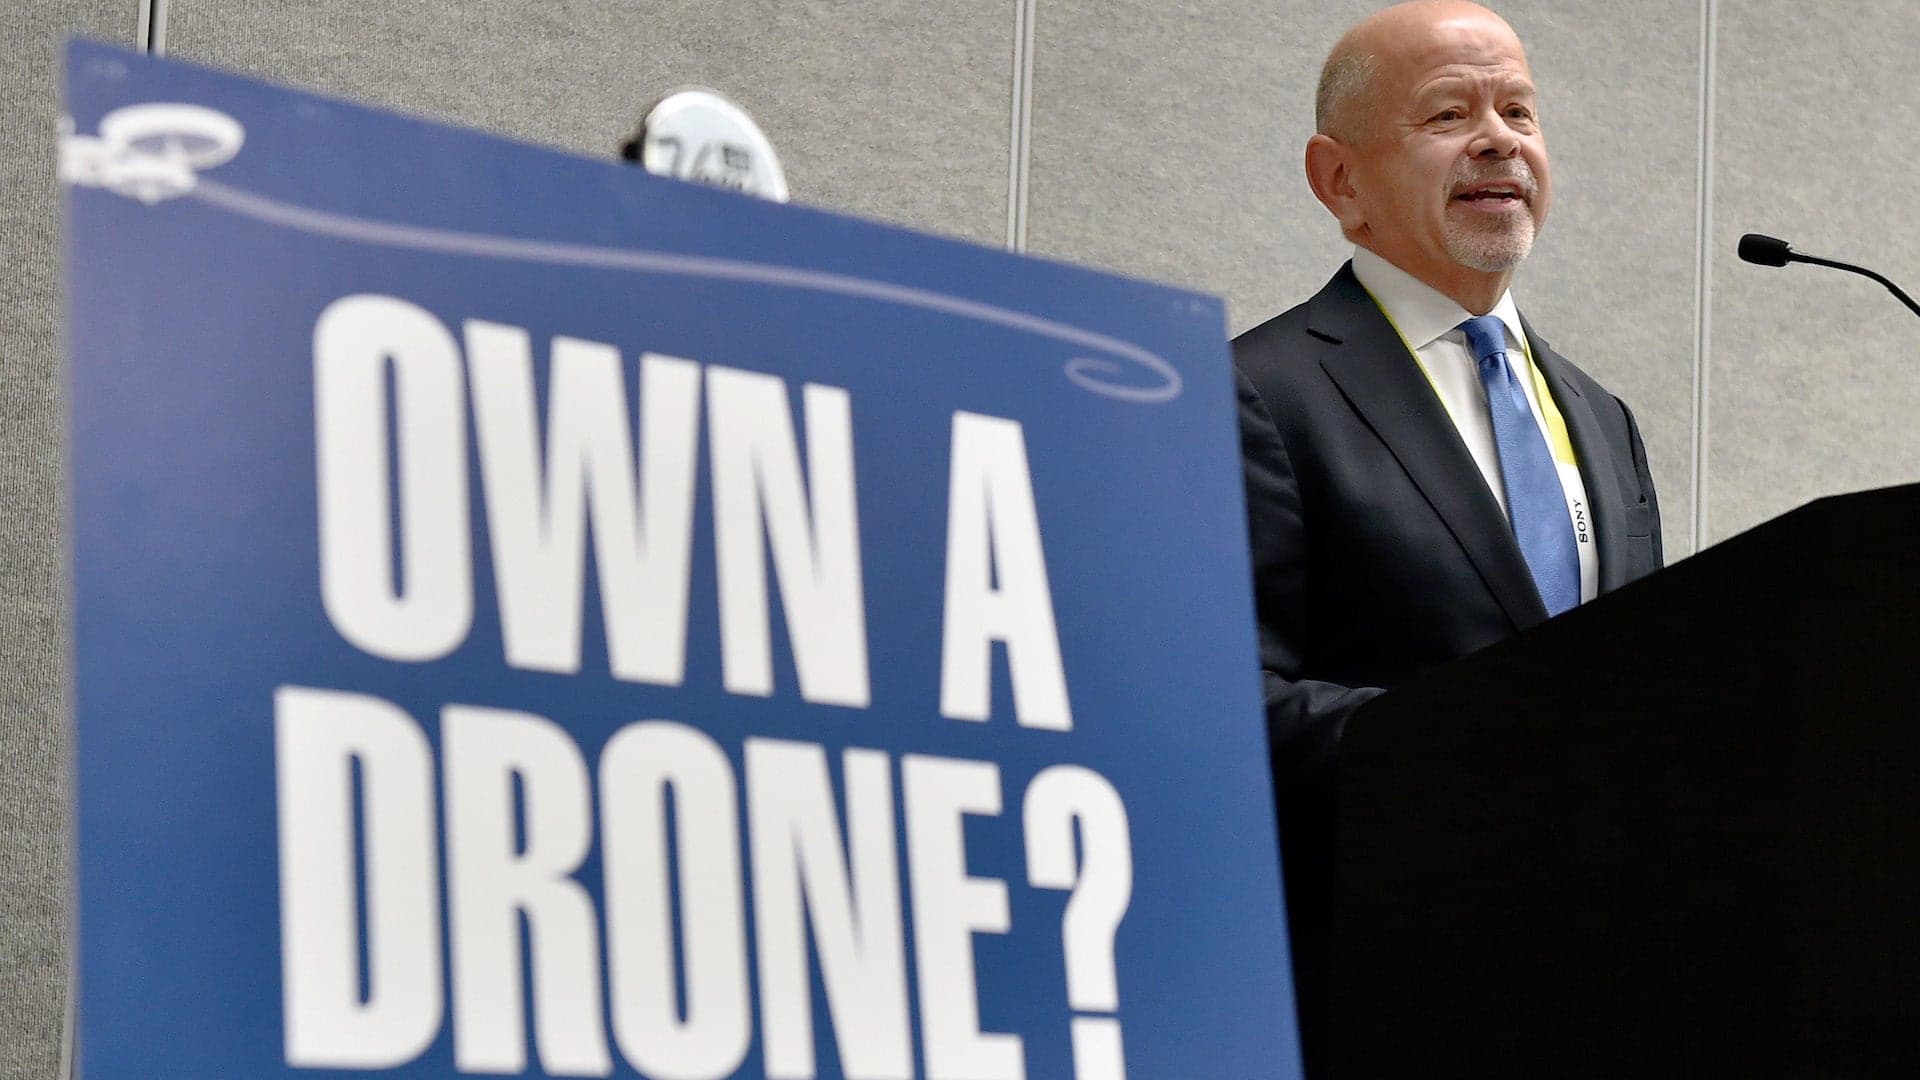 The Commercial Drone Alliance Wants FAA to Regulate Hobby Pilots